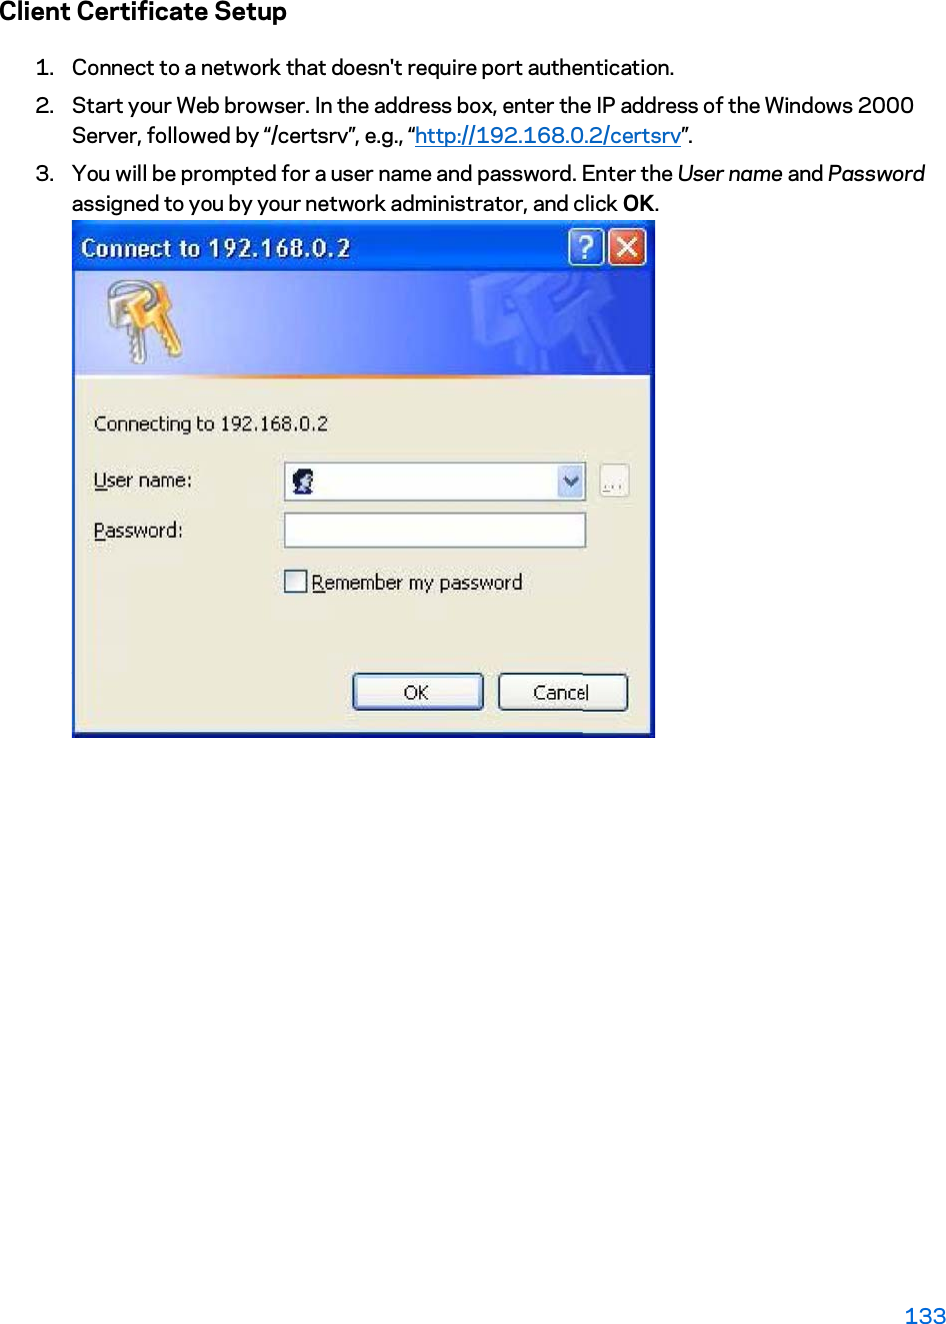 Client Certificate Setup 1. Connect to a network that doesn&apos;t require port authentication.  2. Start your Web browser. In the address box, enter the IP address of the Windows 2000 Server, followed by “/certsrv”, e.g., “http://192.168.0.2/certsrv”. 3. You will be prompted for a user name and password. Enter the User name and Password assigned to you by your network administrator, and click OK.  133